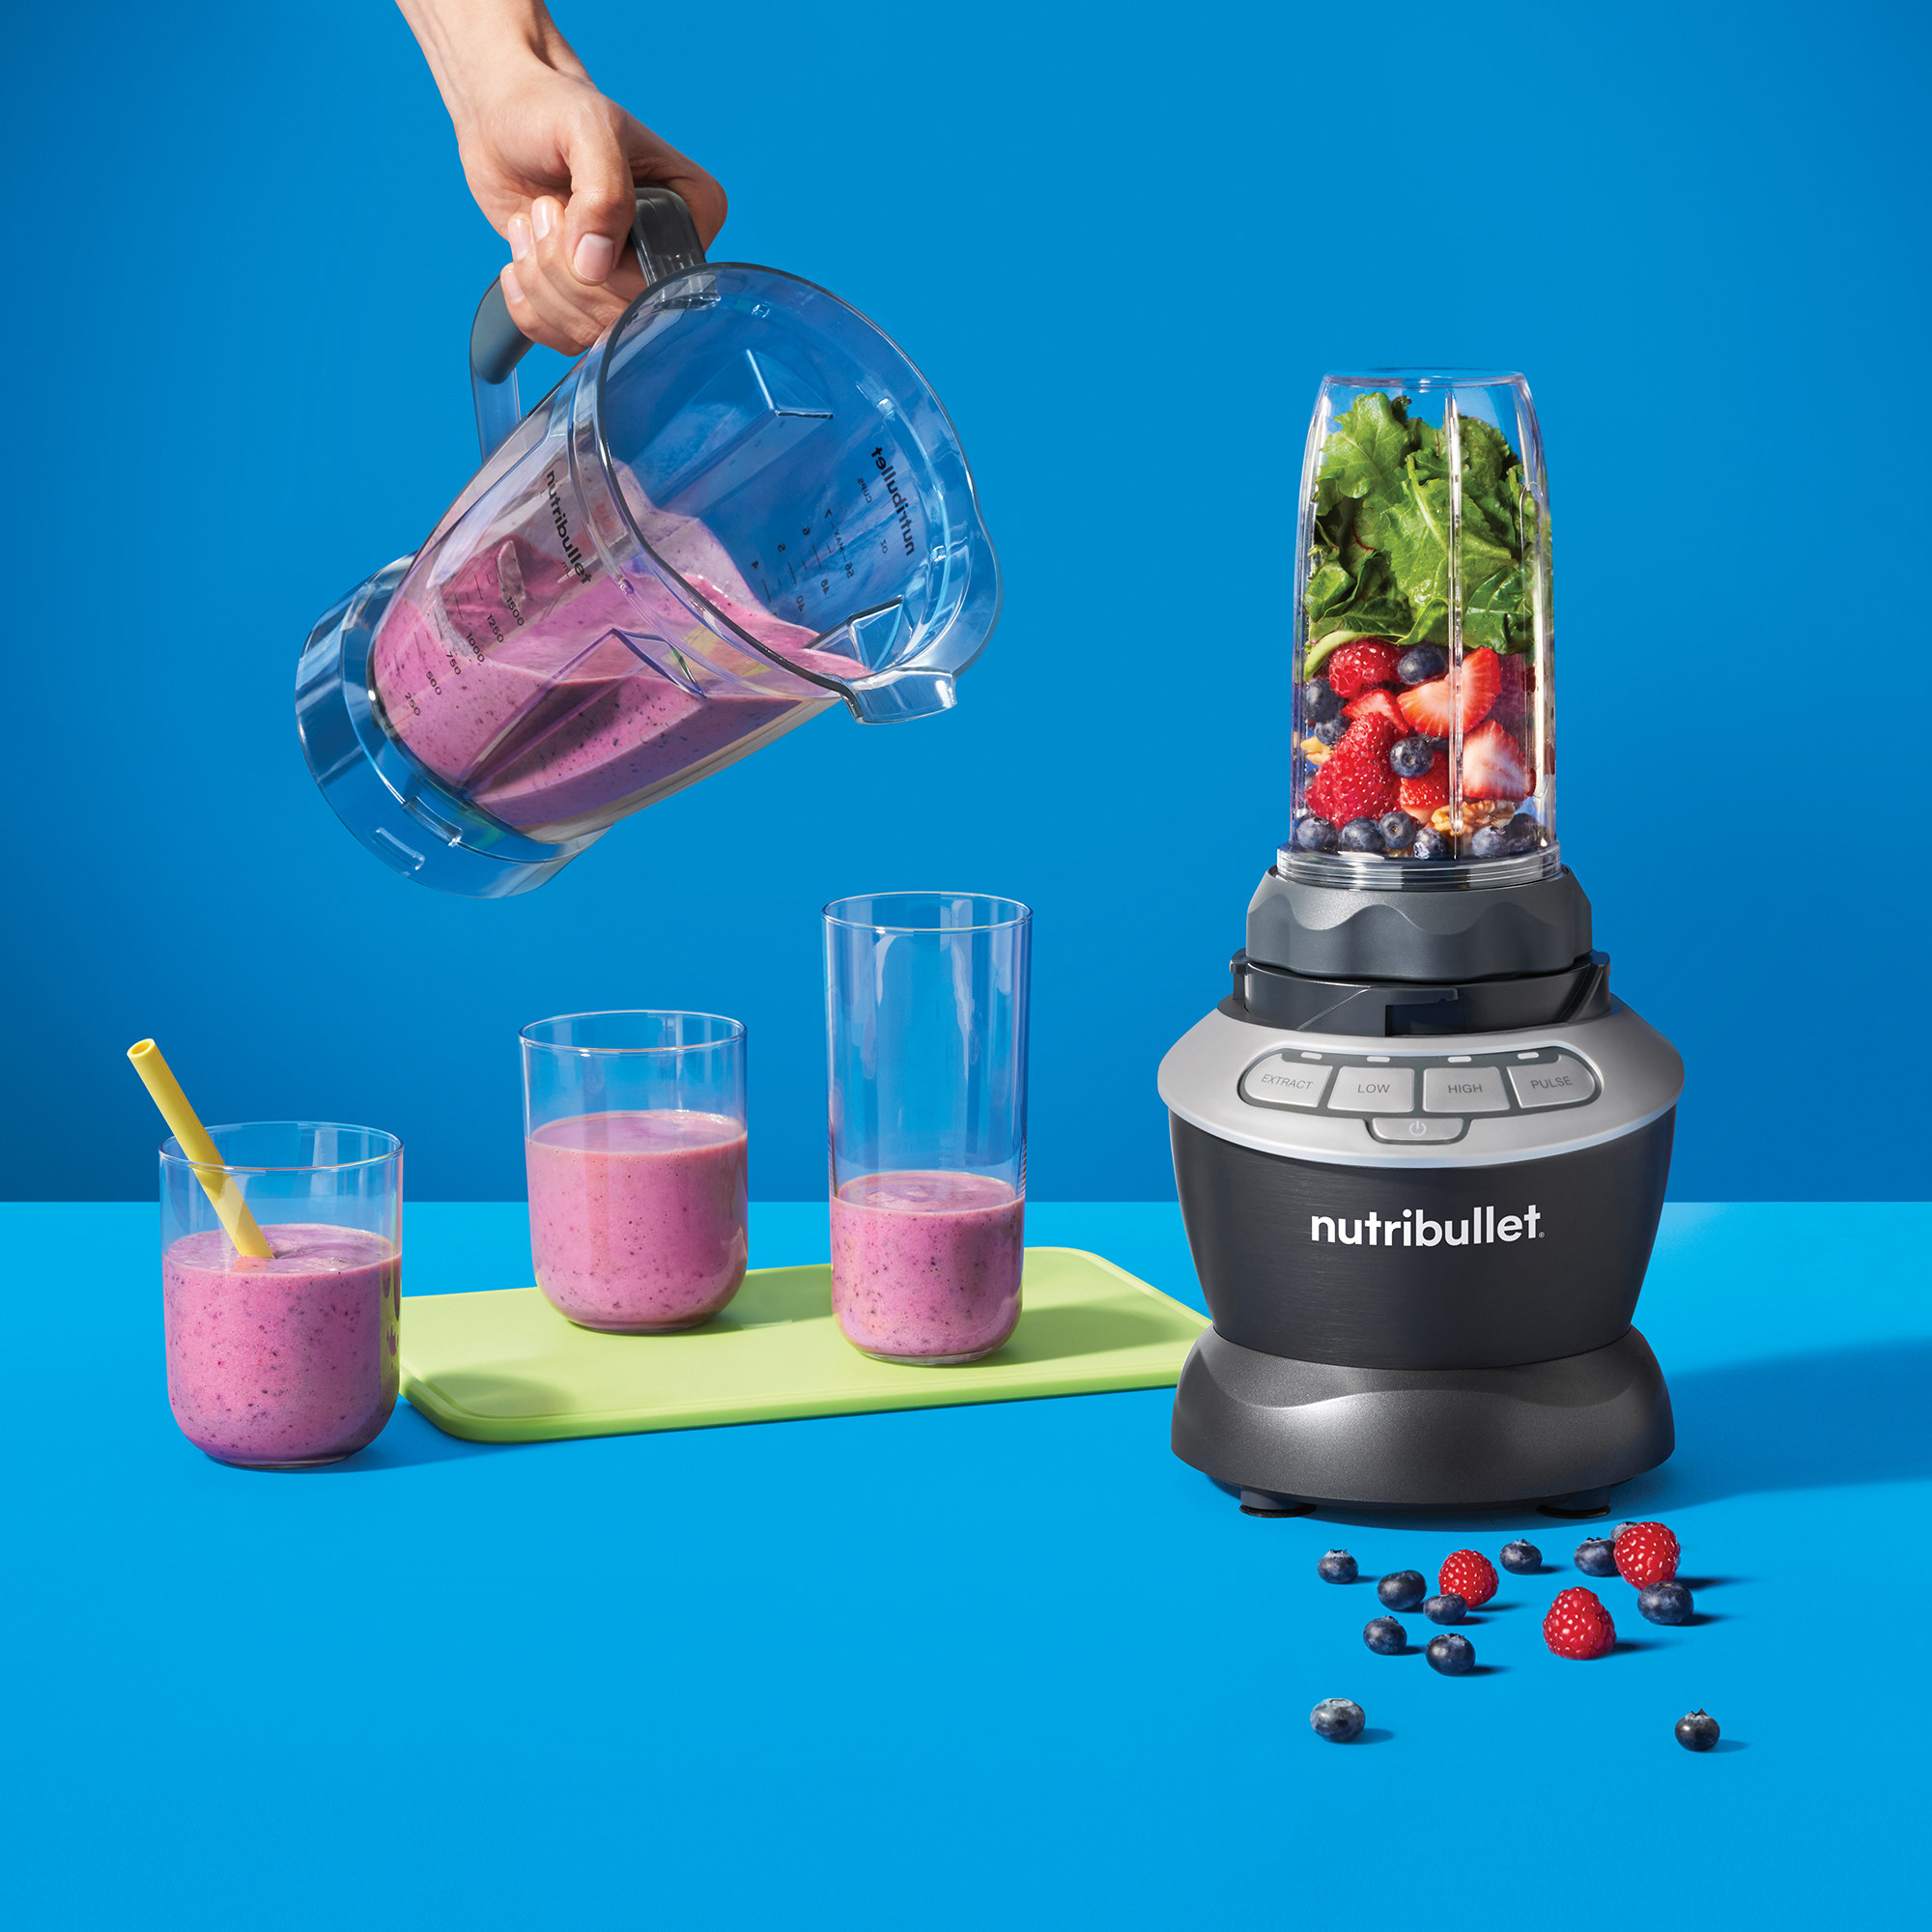 The blender with the single-serve cup on it, while a model holds the larger cup.